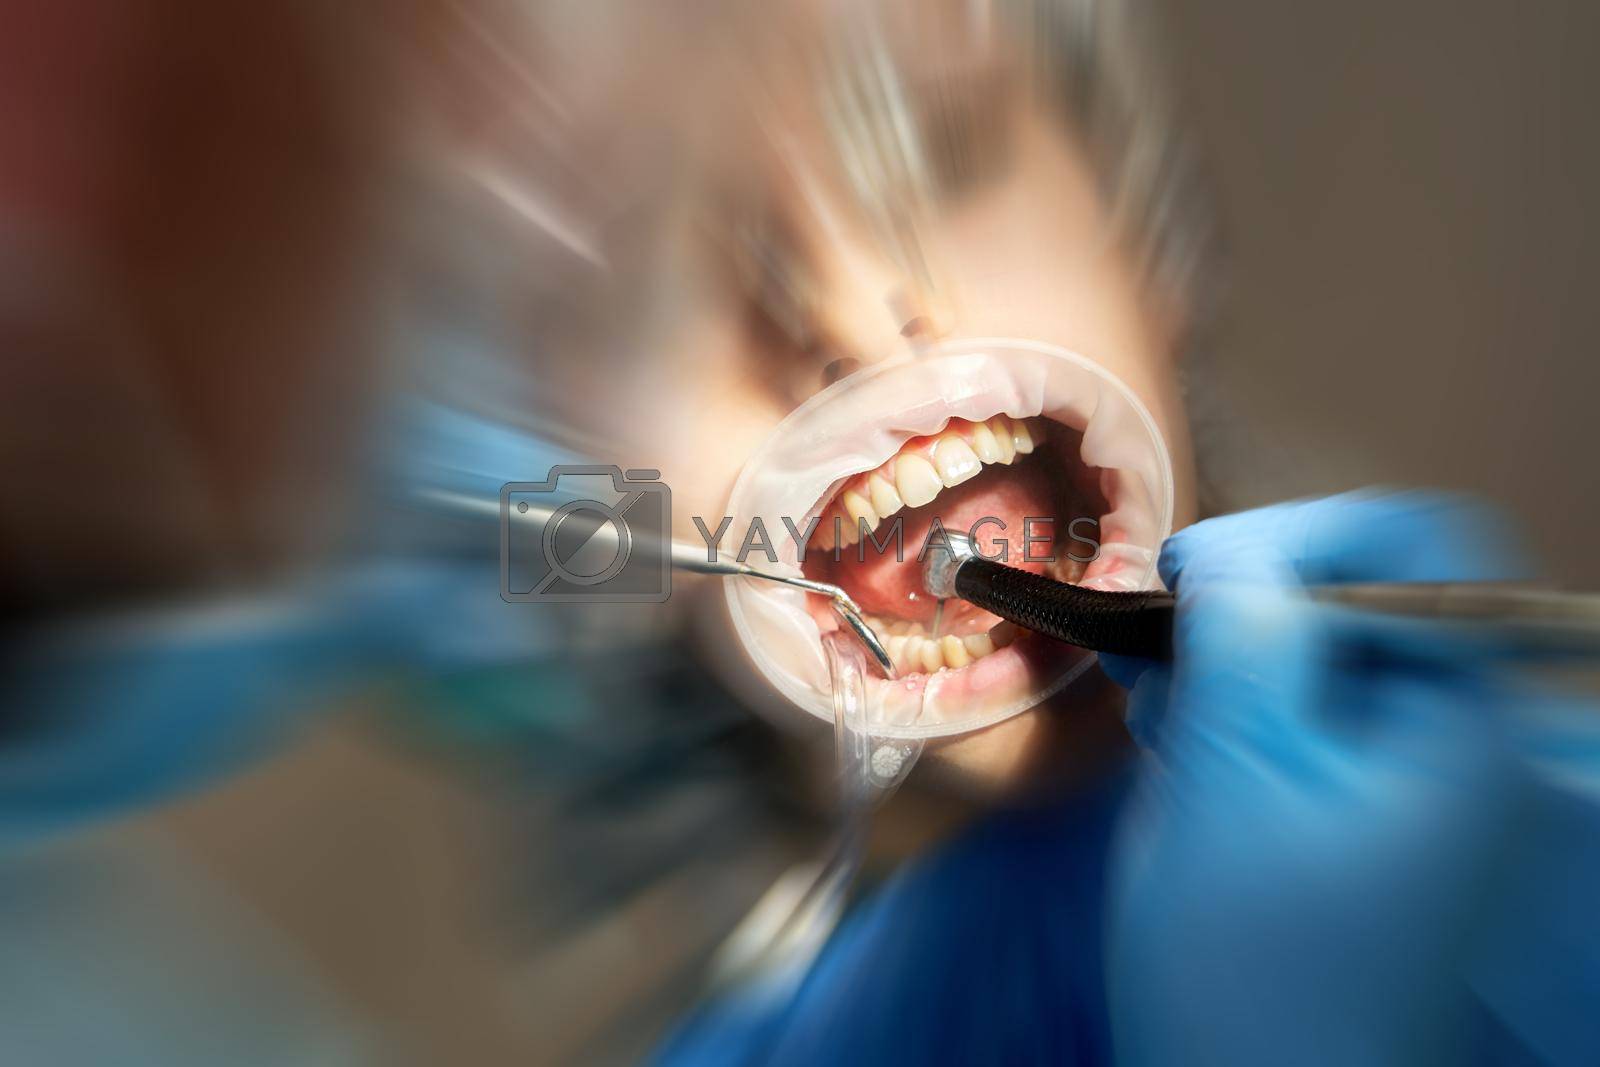 Lady patient sitting in stomatology chair, dentist drilling tooth, modern clinic